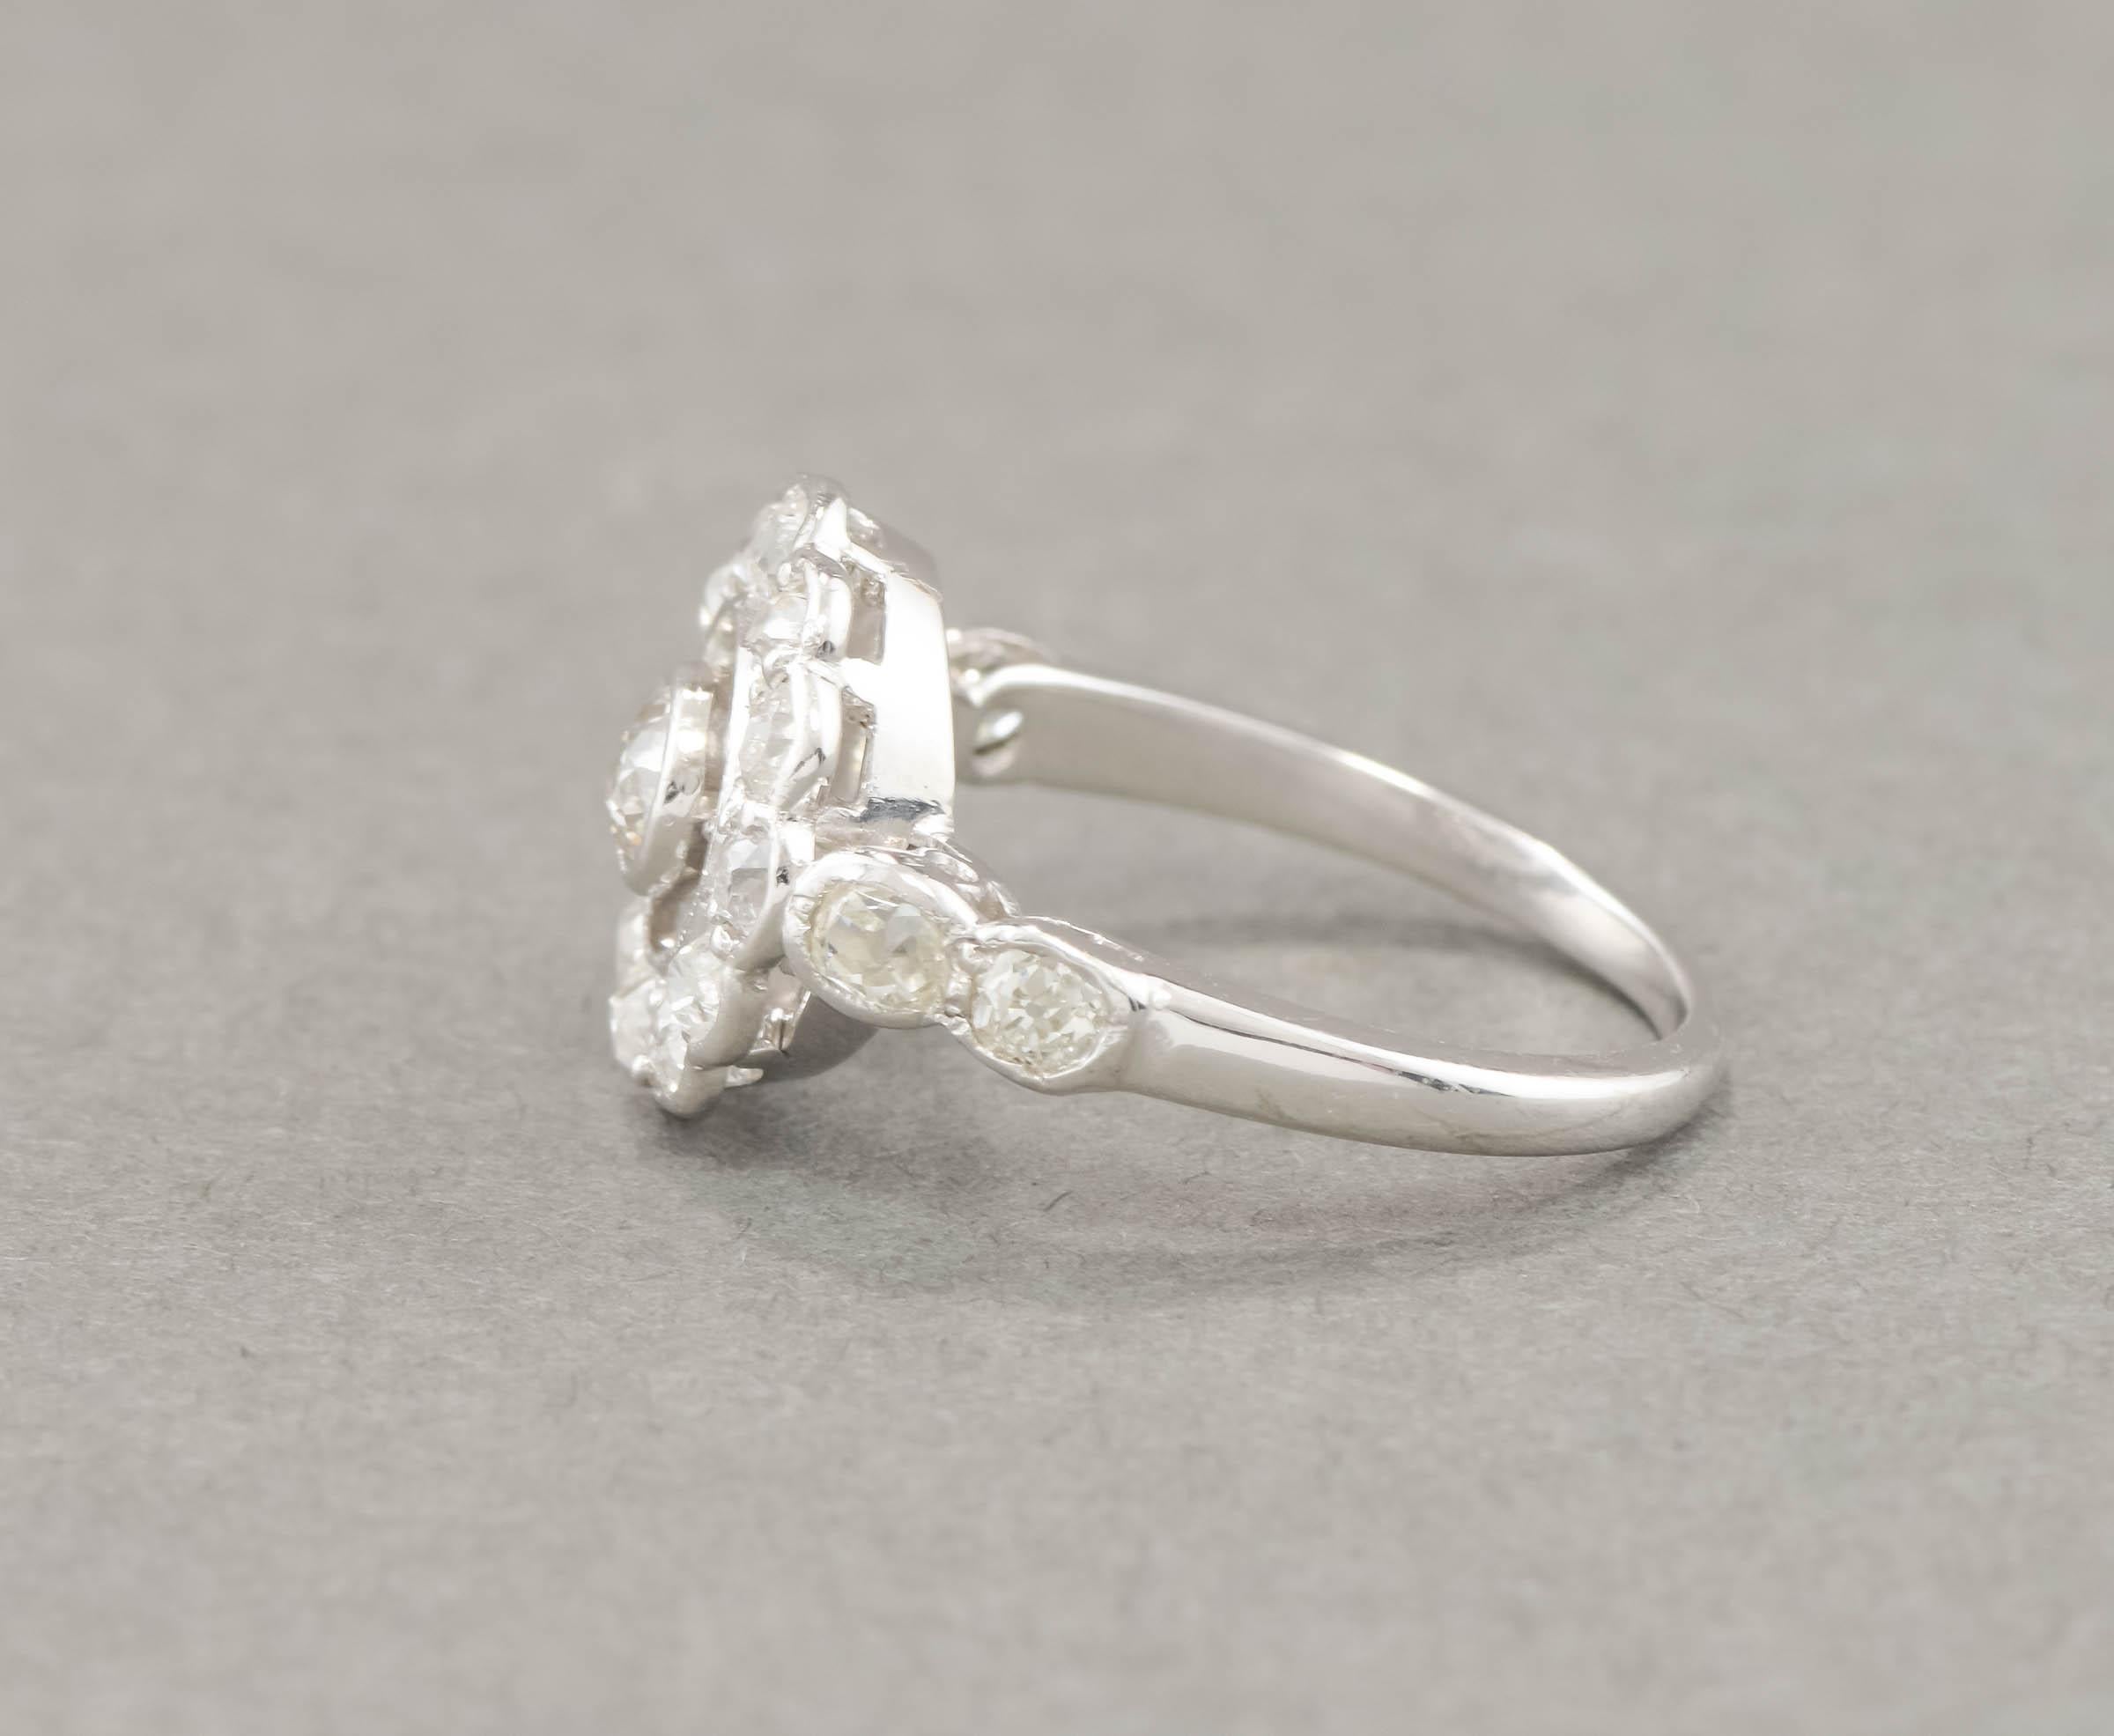 Women's 1930's Art Deco Diamond Target Halo Engagement Ring with Appraisals For Sale